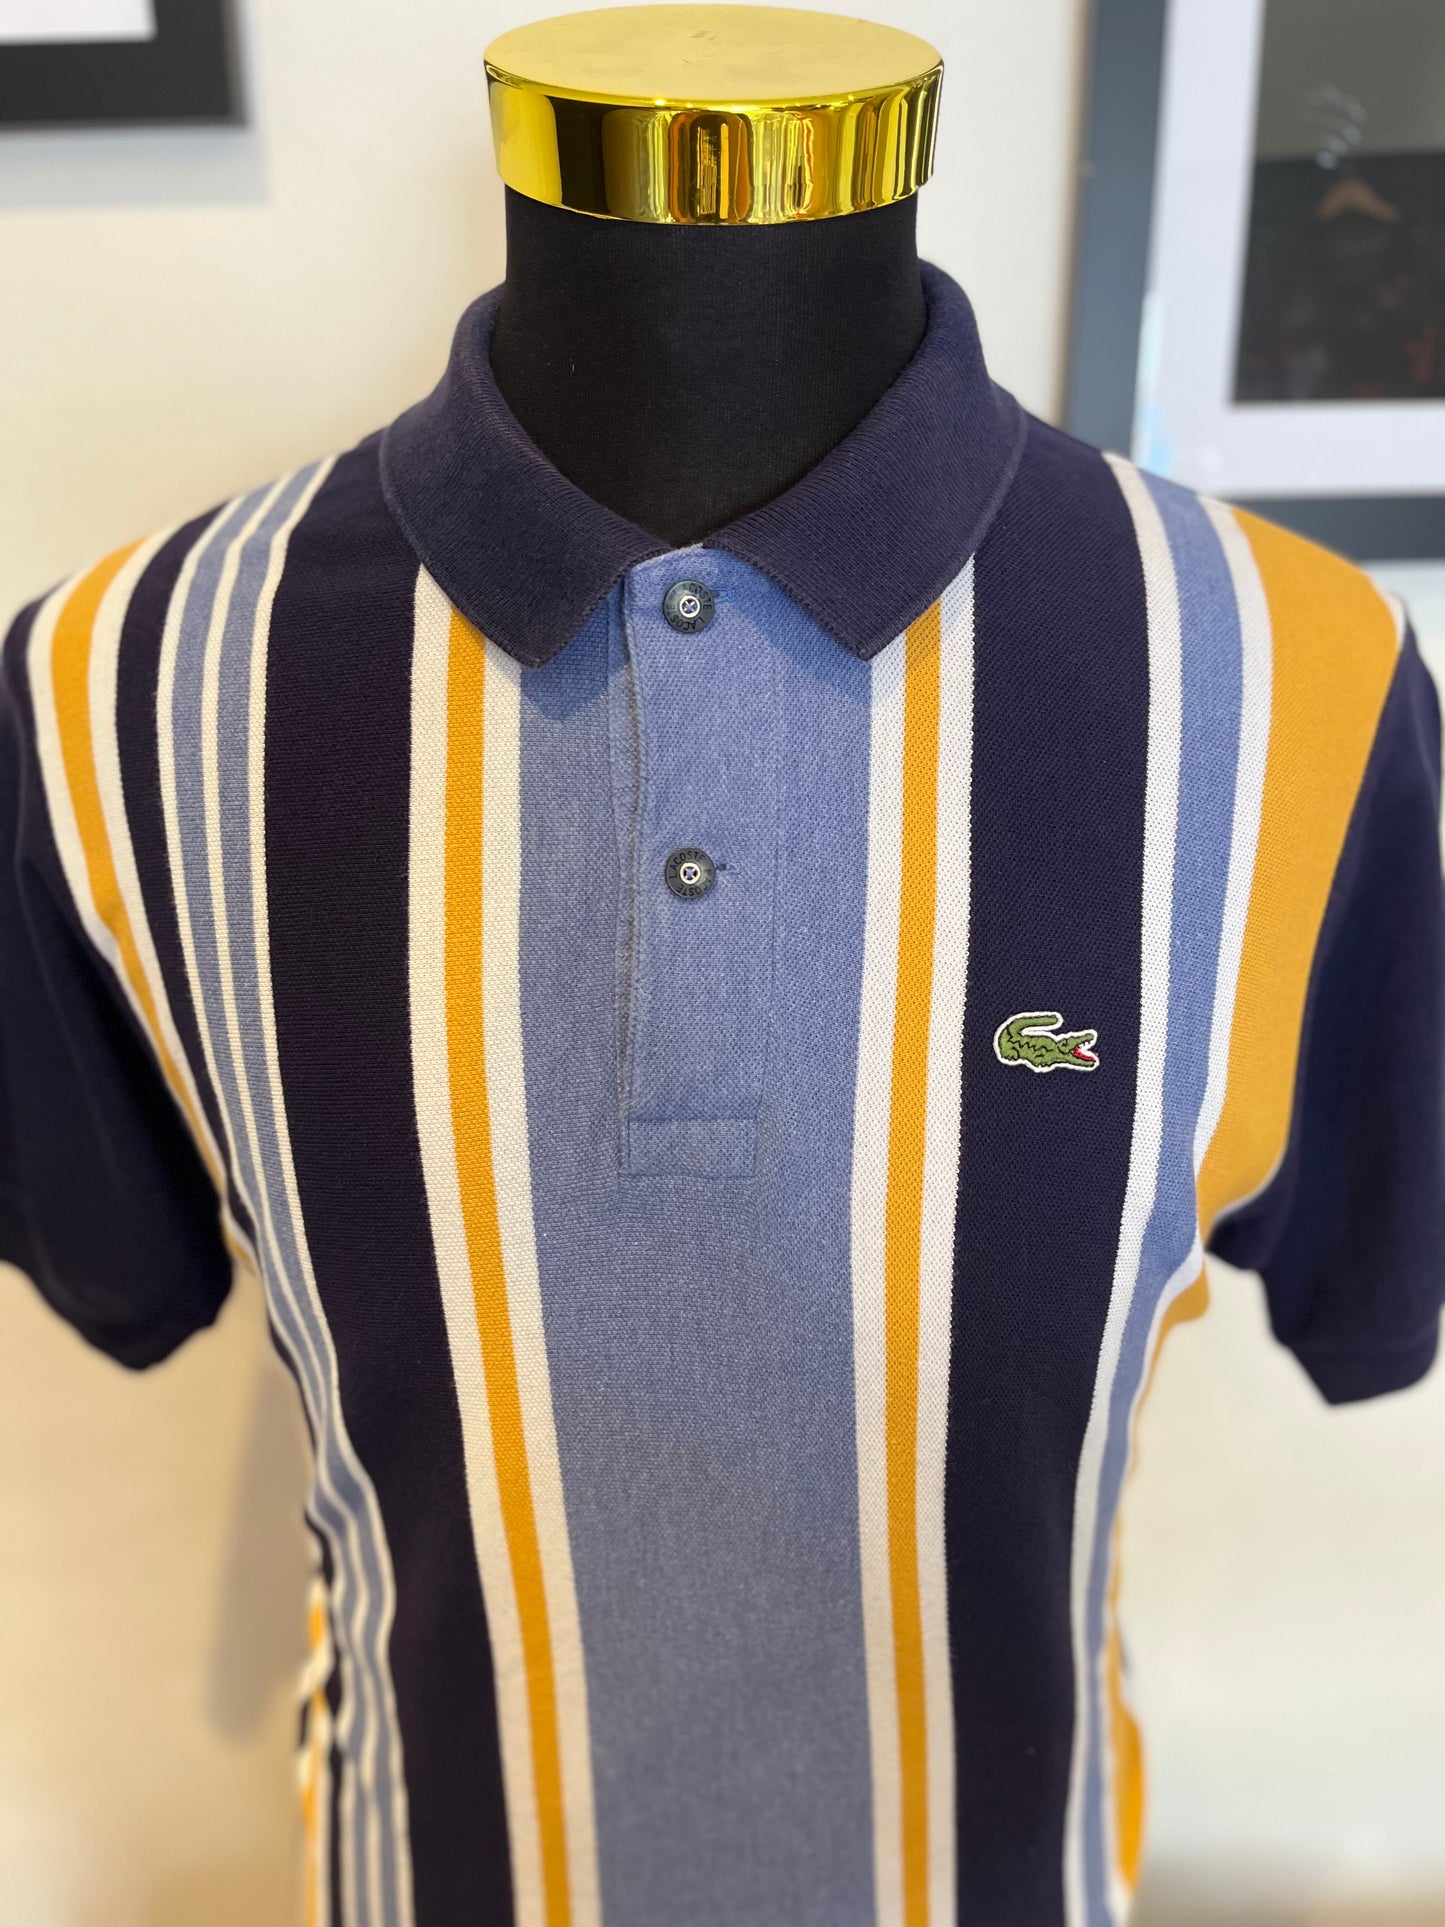 Lacoste 100% Cotton Blue Gold Stripe Polo Shirt Size 6 Large To XL Made in France